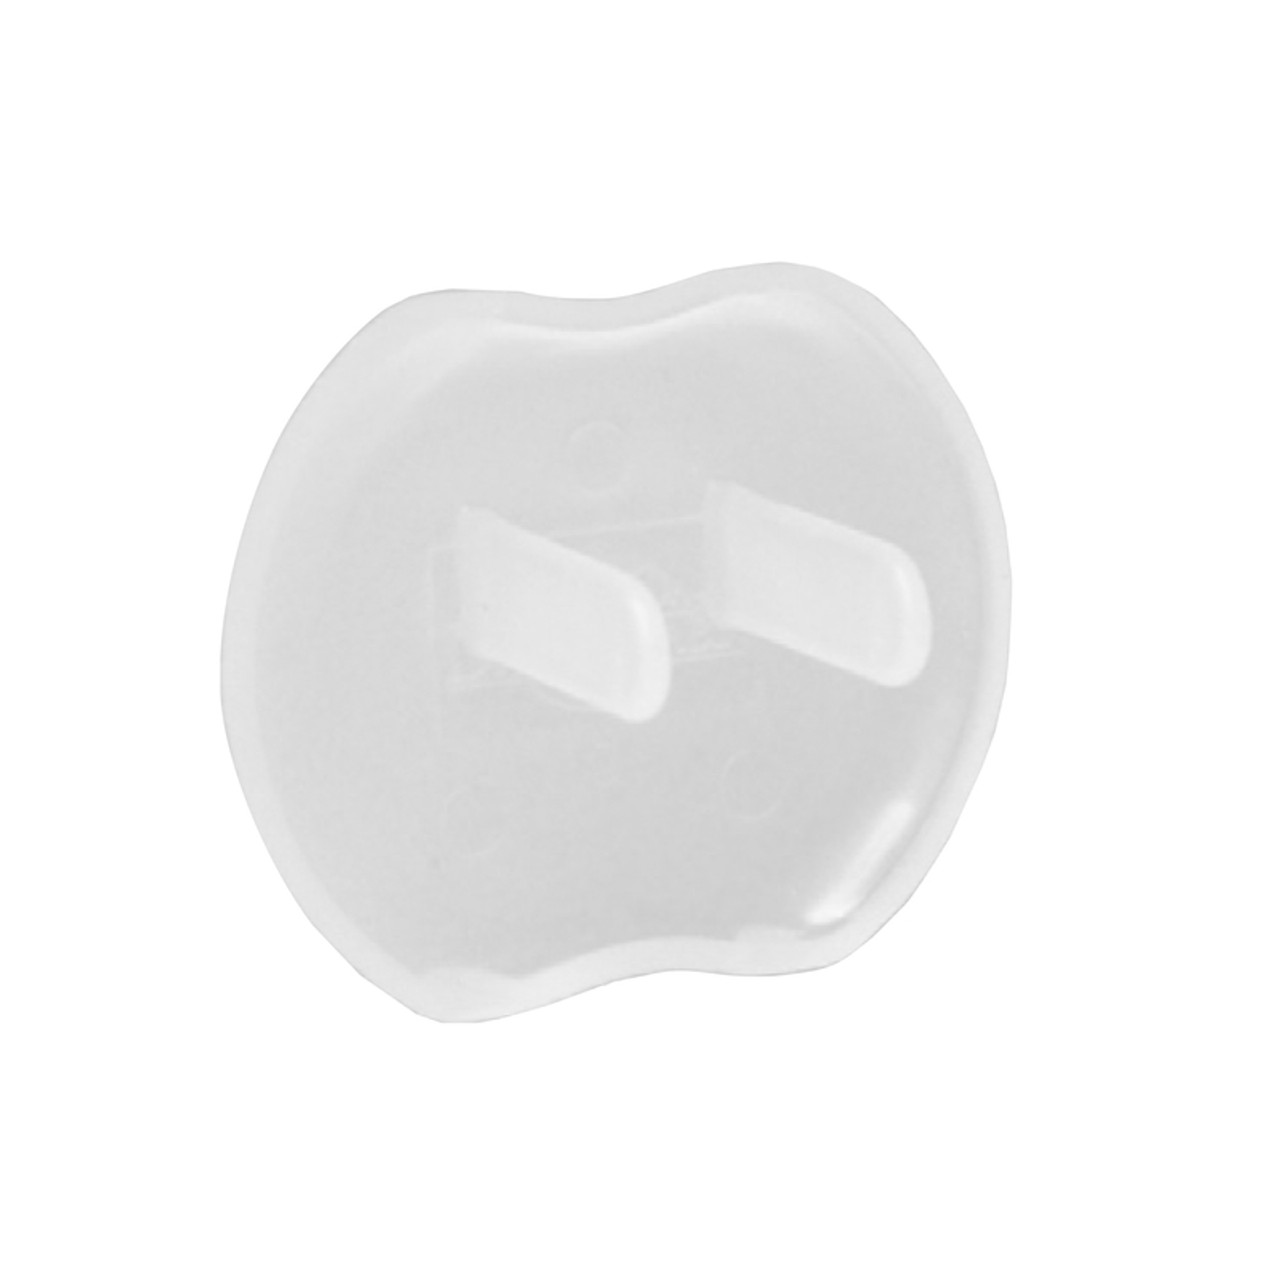 DREAMBABY EZY-FIT CLEAR PLASTIC DOOR KNOB COVERS 3 PK - The